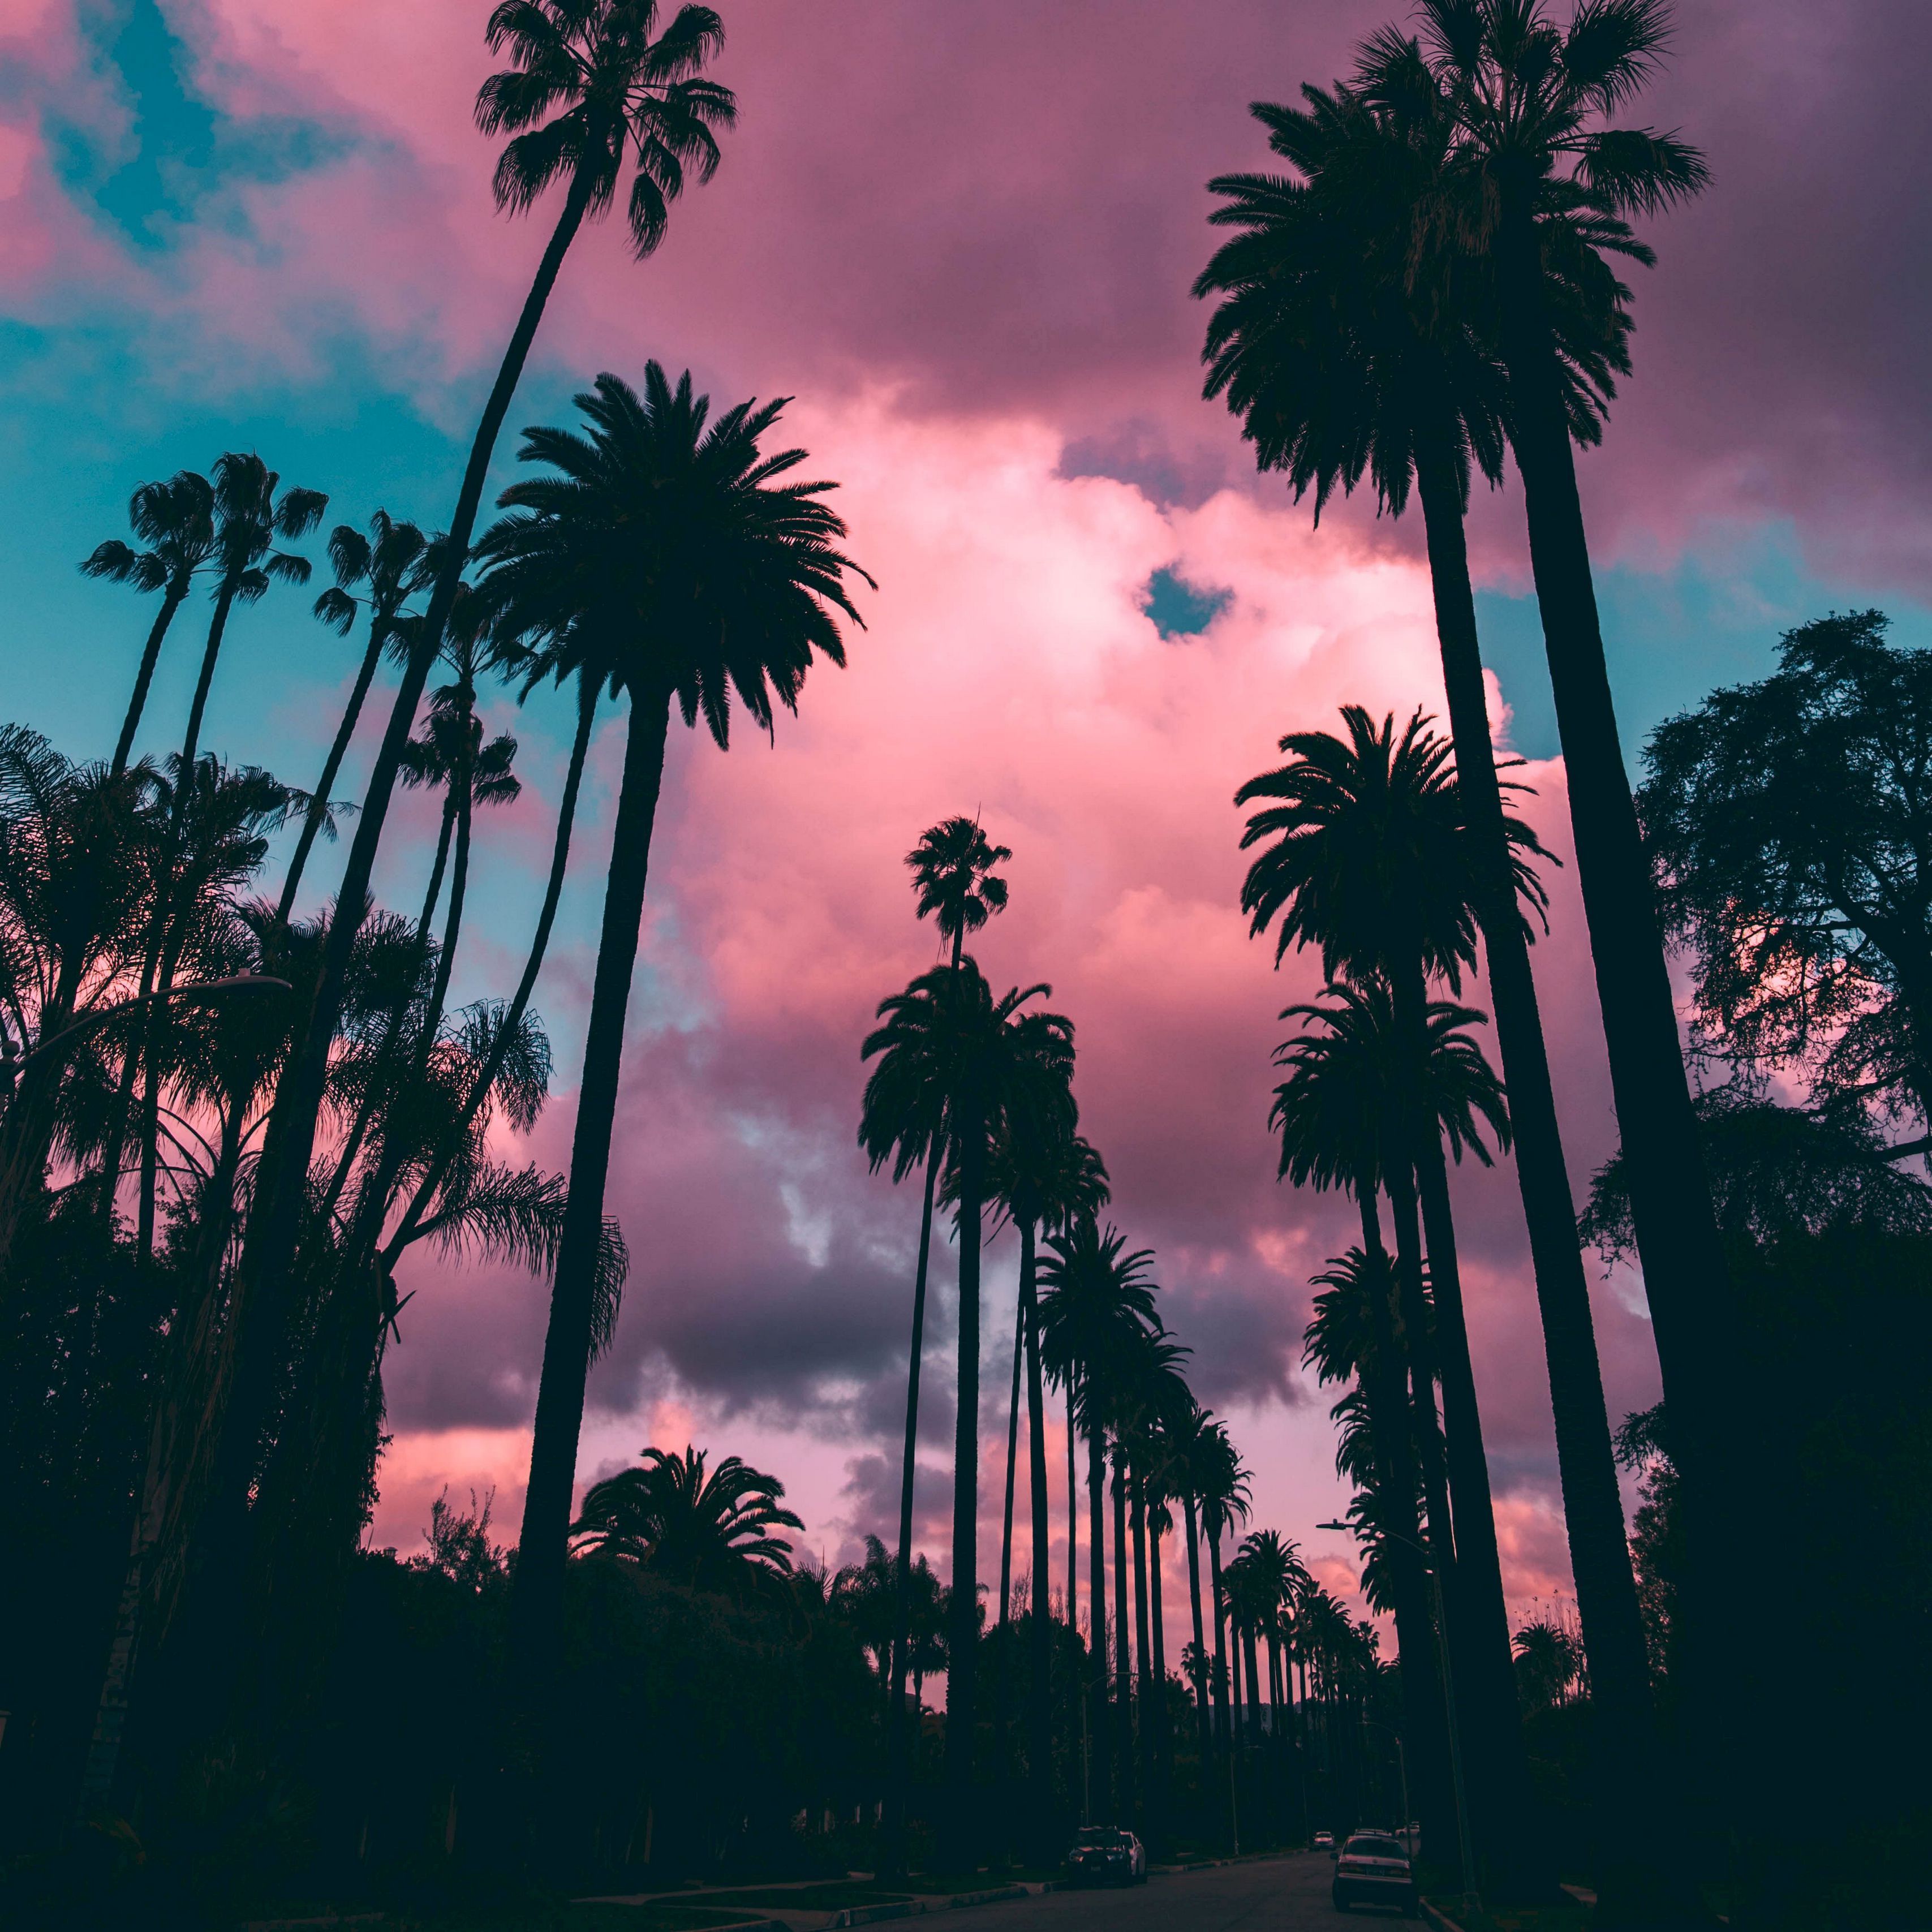 Download wallpaper 3415x3415 palm trees, sunset, clouds, tropics